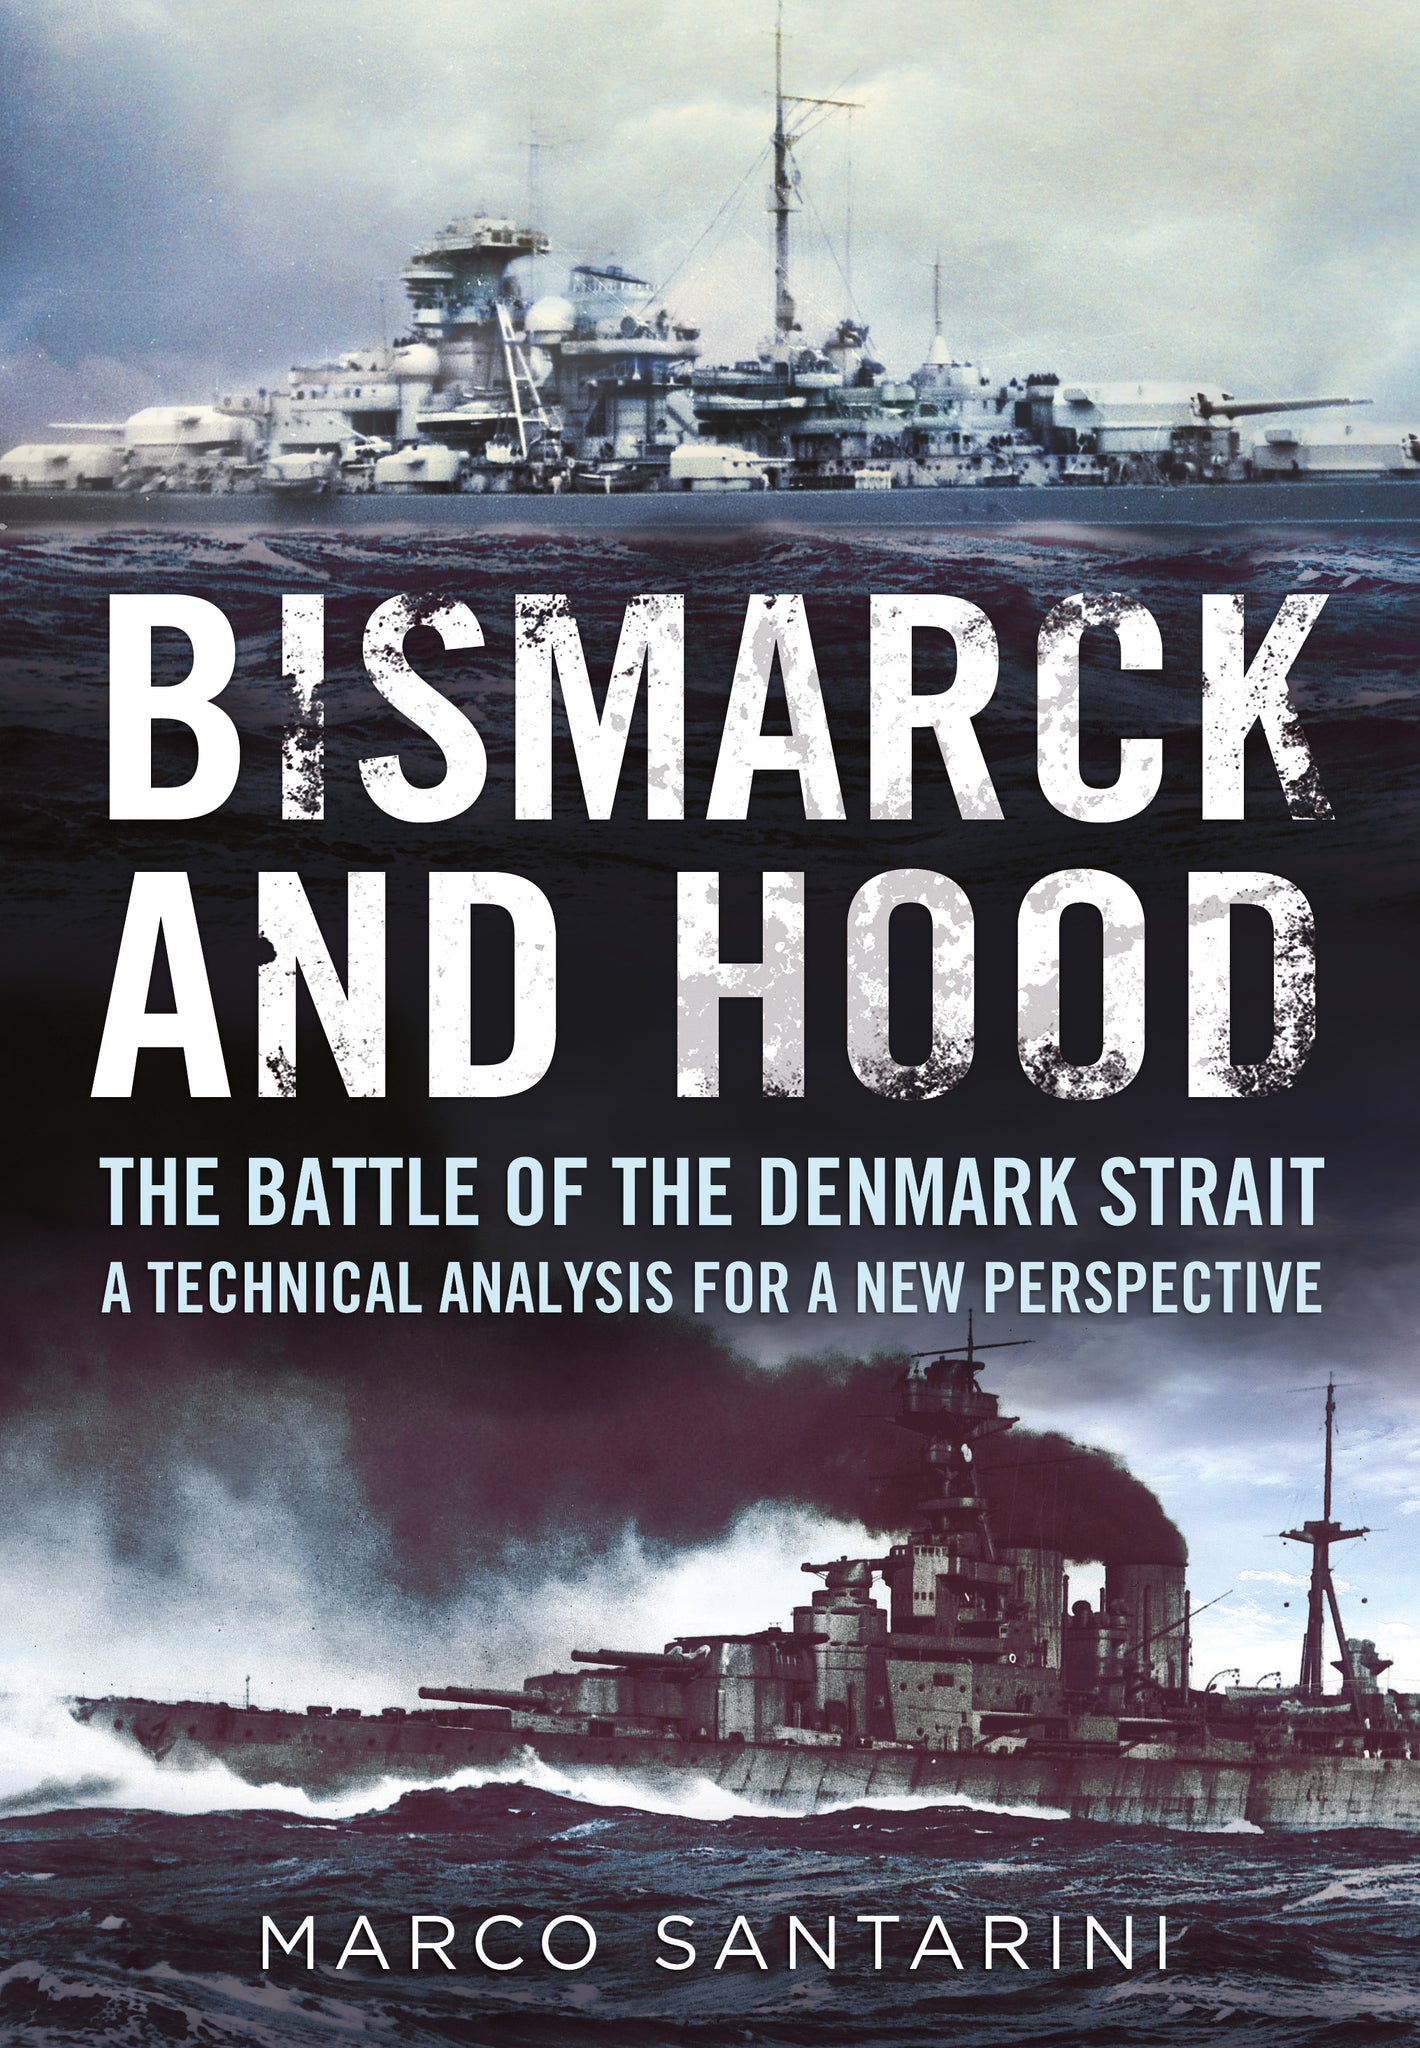 Bismarck and Hood The Battle of the Denmark Strait - published by Fonthill Media